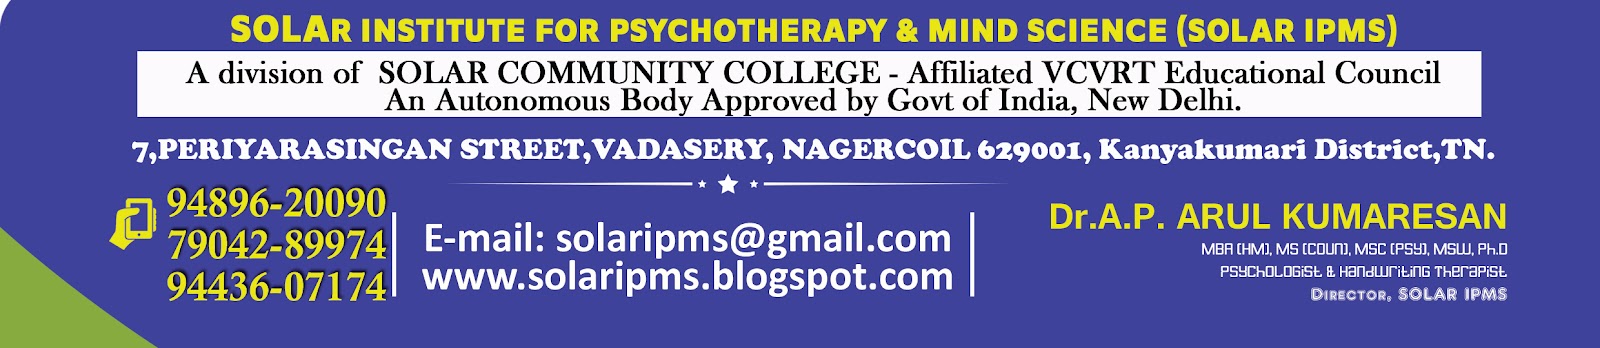 SOLAR ACADEMY &amp; INSTITUE FOR PSYCHOTHERAPY  [SOLAR IPMS]